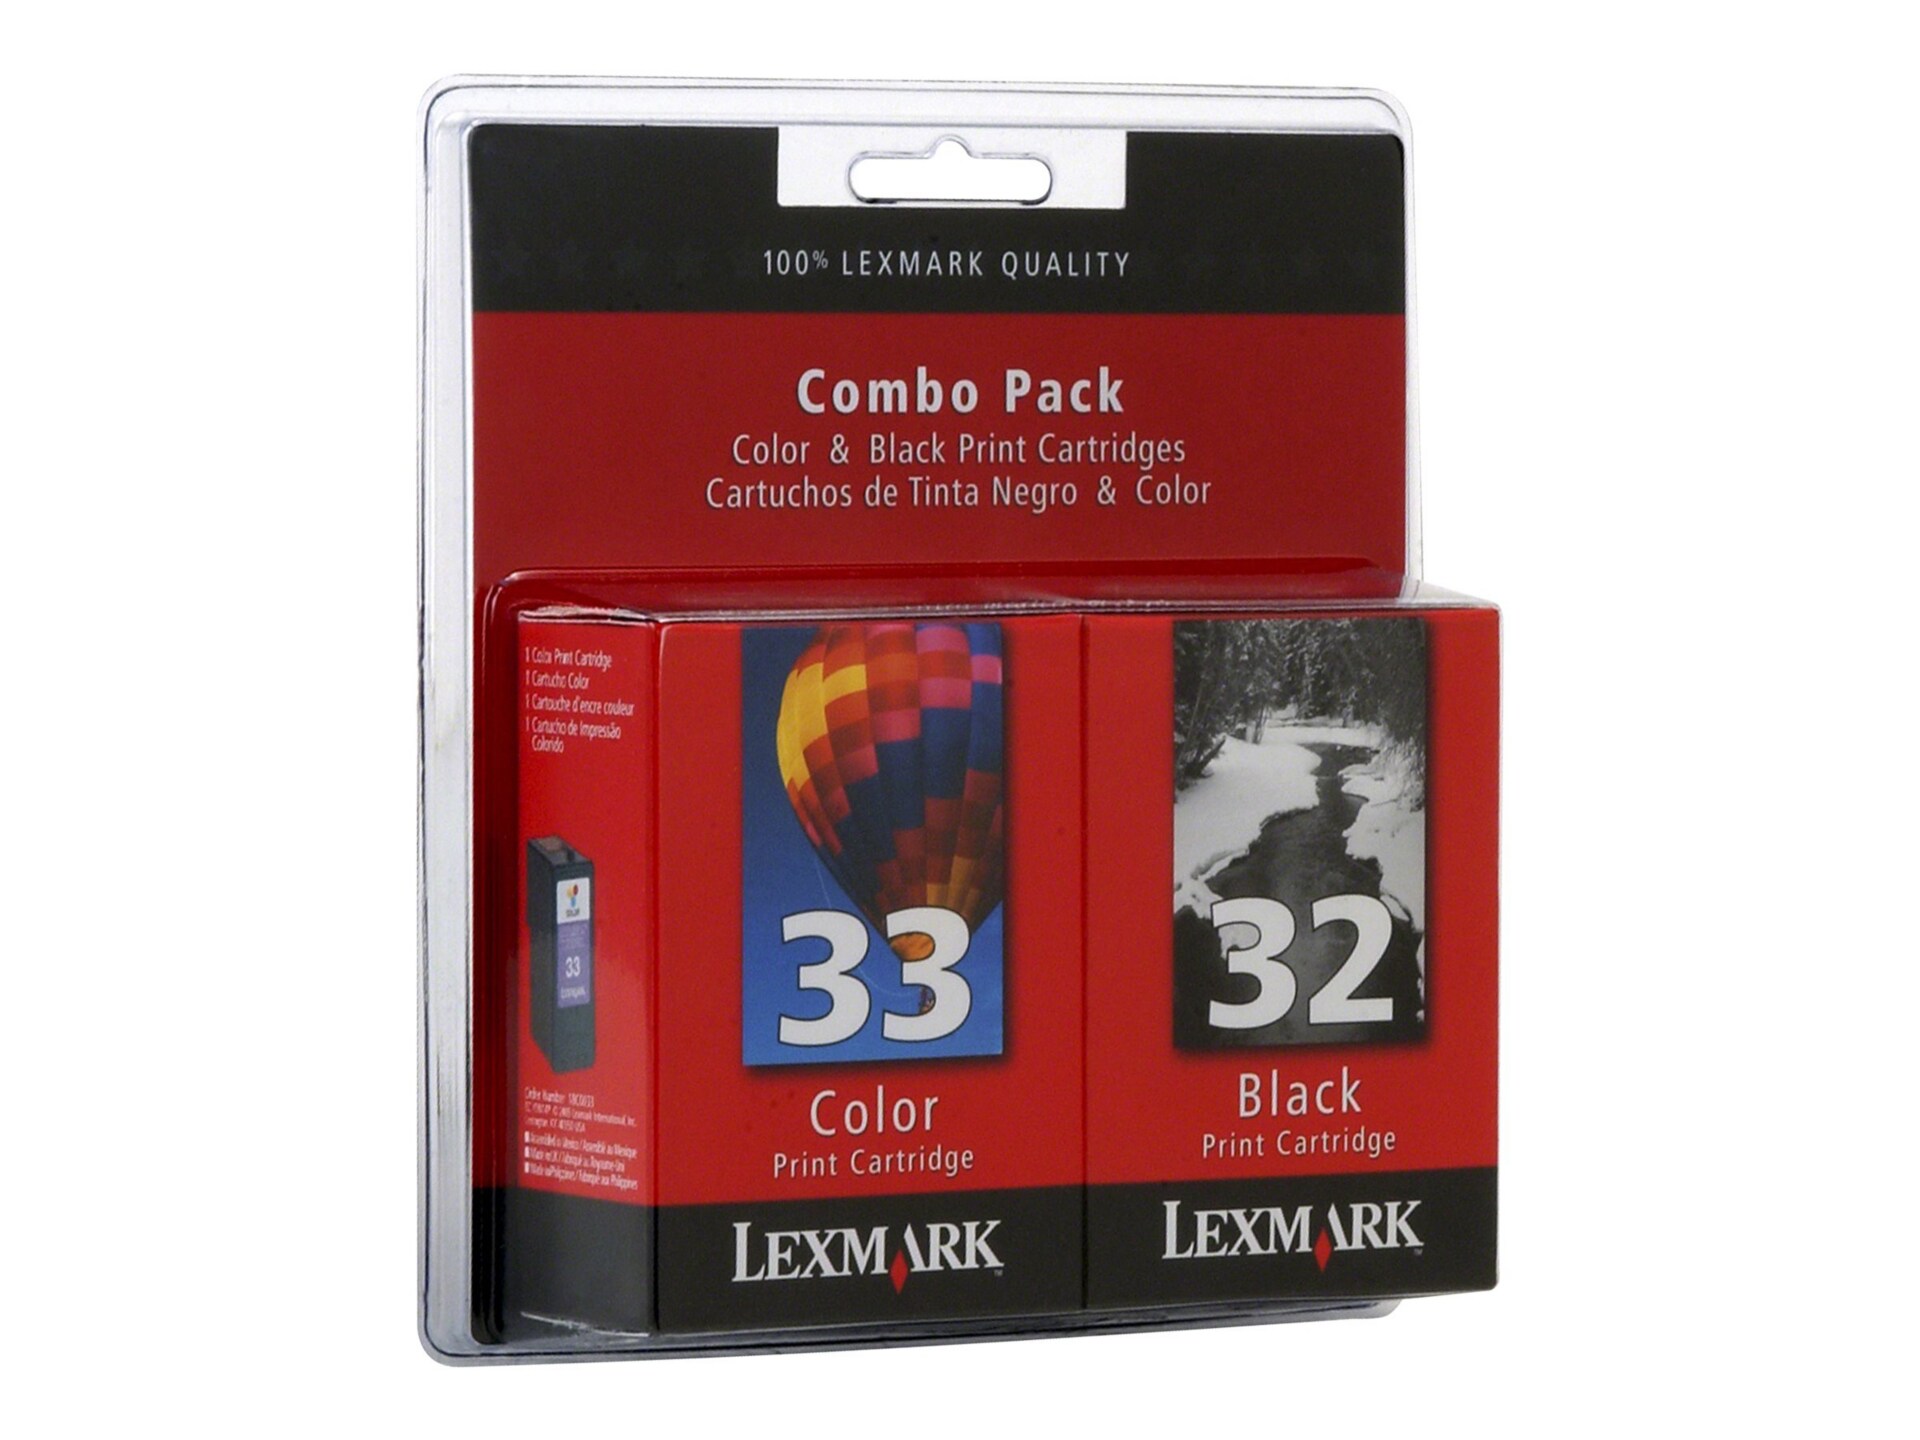 Lexmark #33 and #32 Multi-Pack Inkjet Cartridge (Black and Color)
